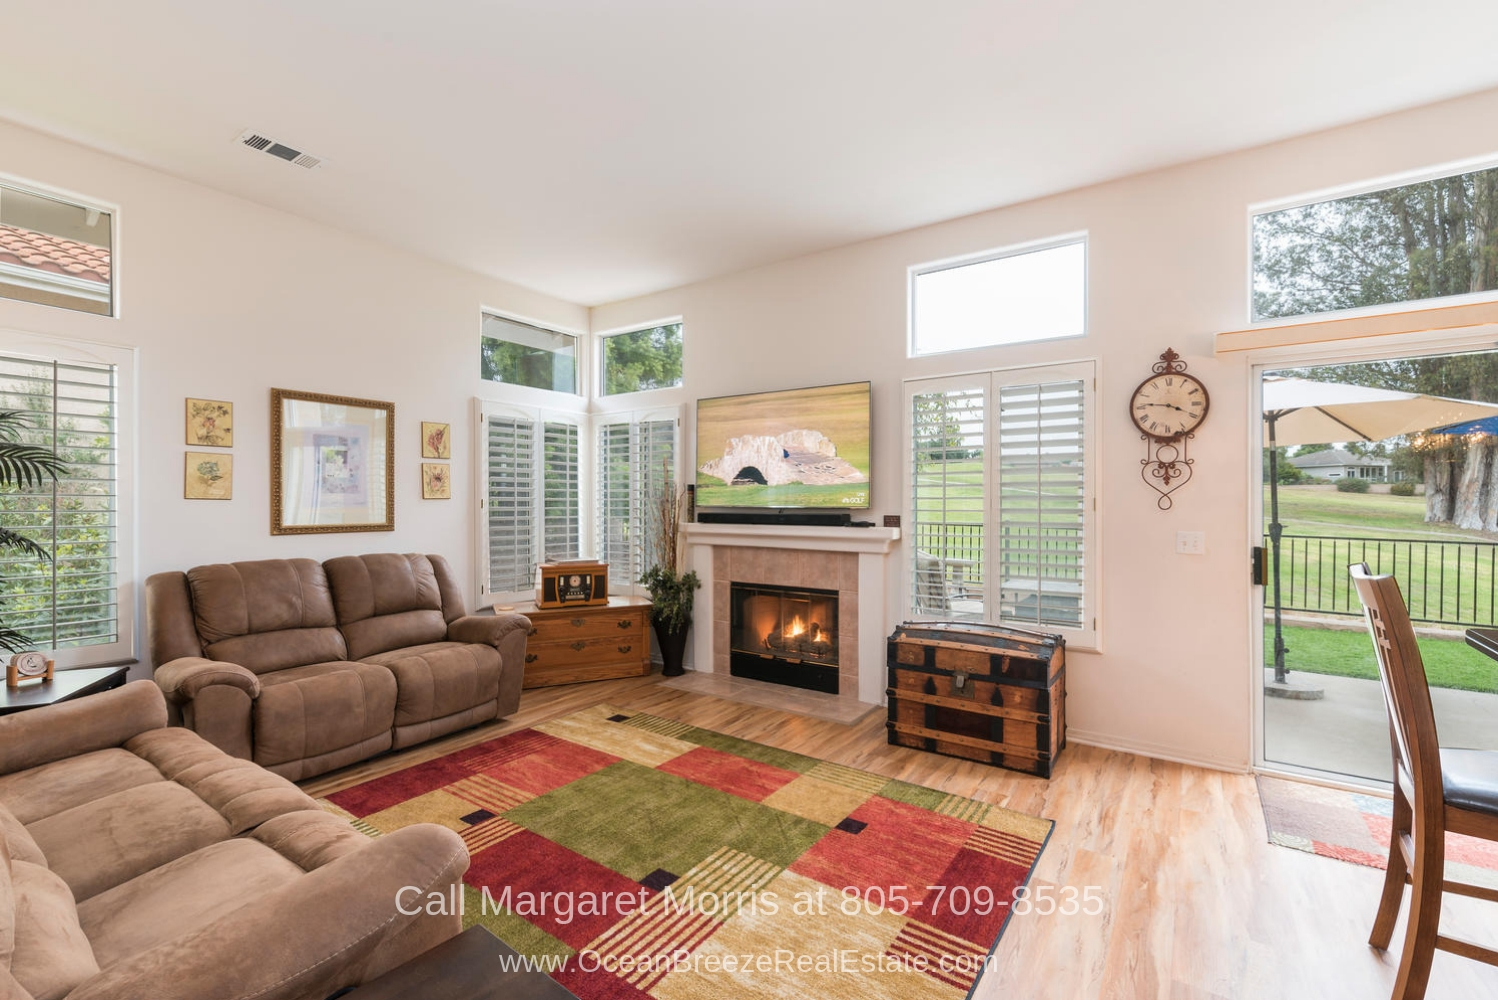 Nipomo CA Golf Homes - You’ll love the peaceful and inviting interior of this Nipomo CA golf home. 